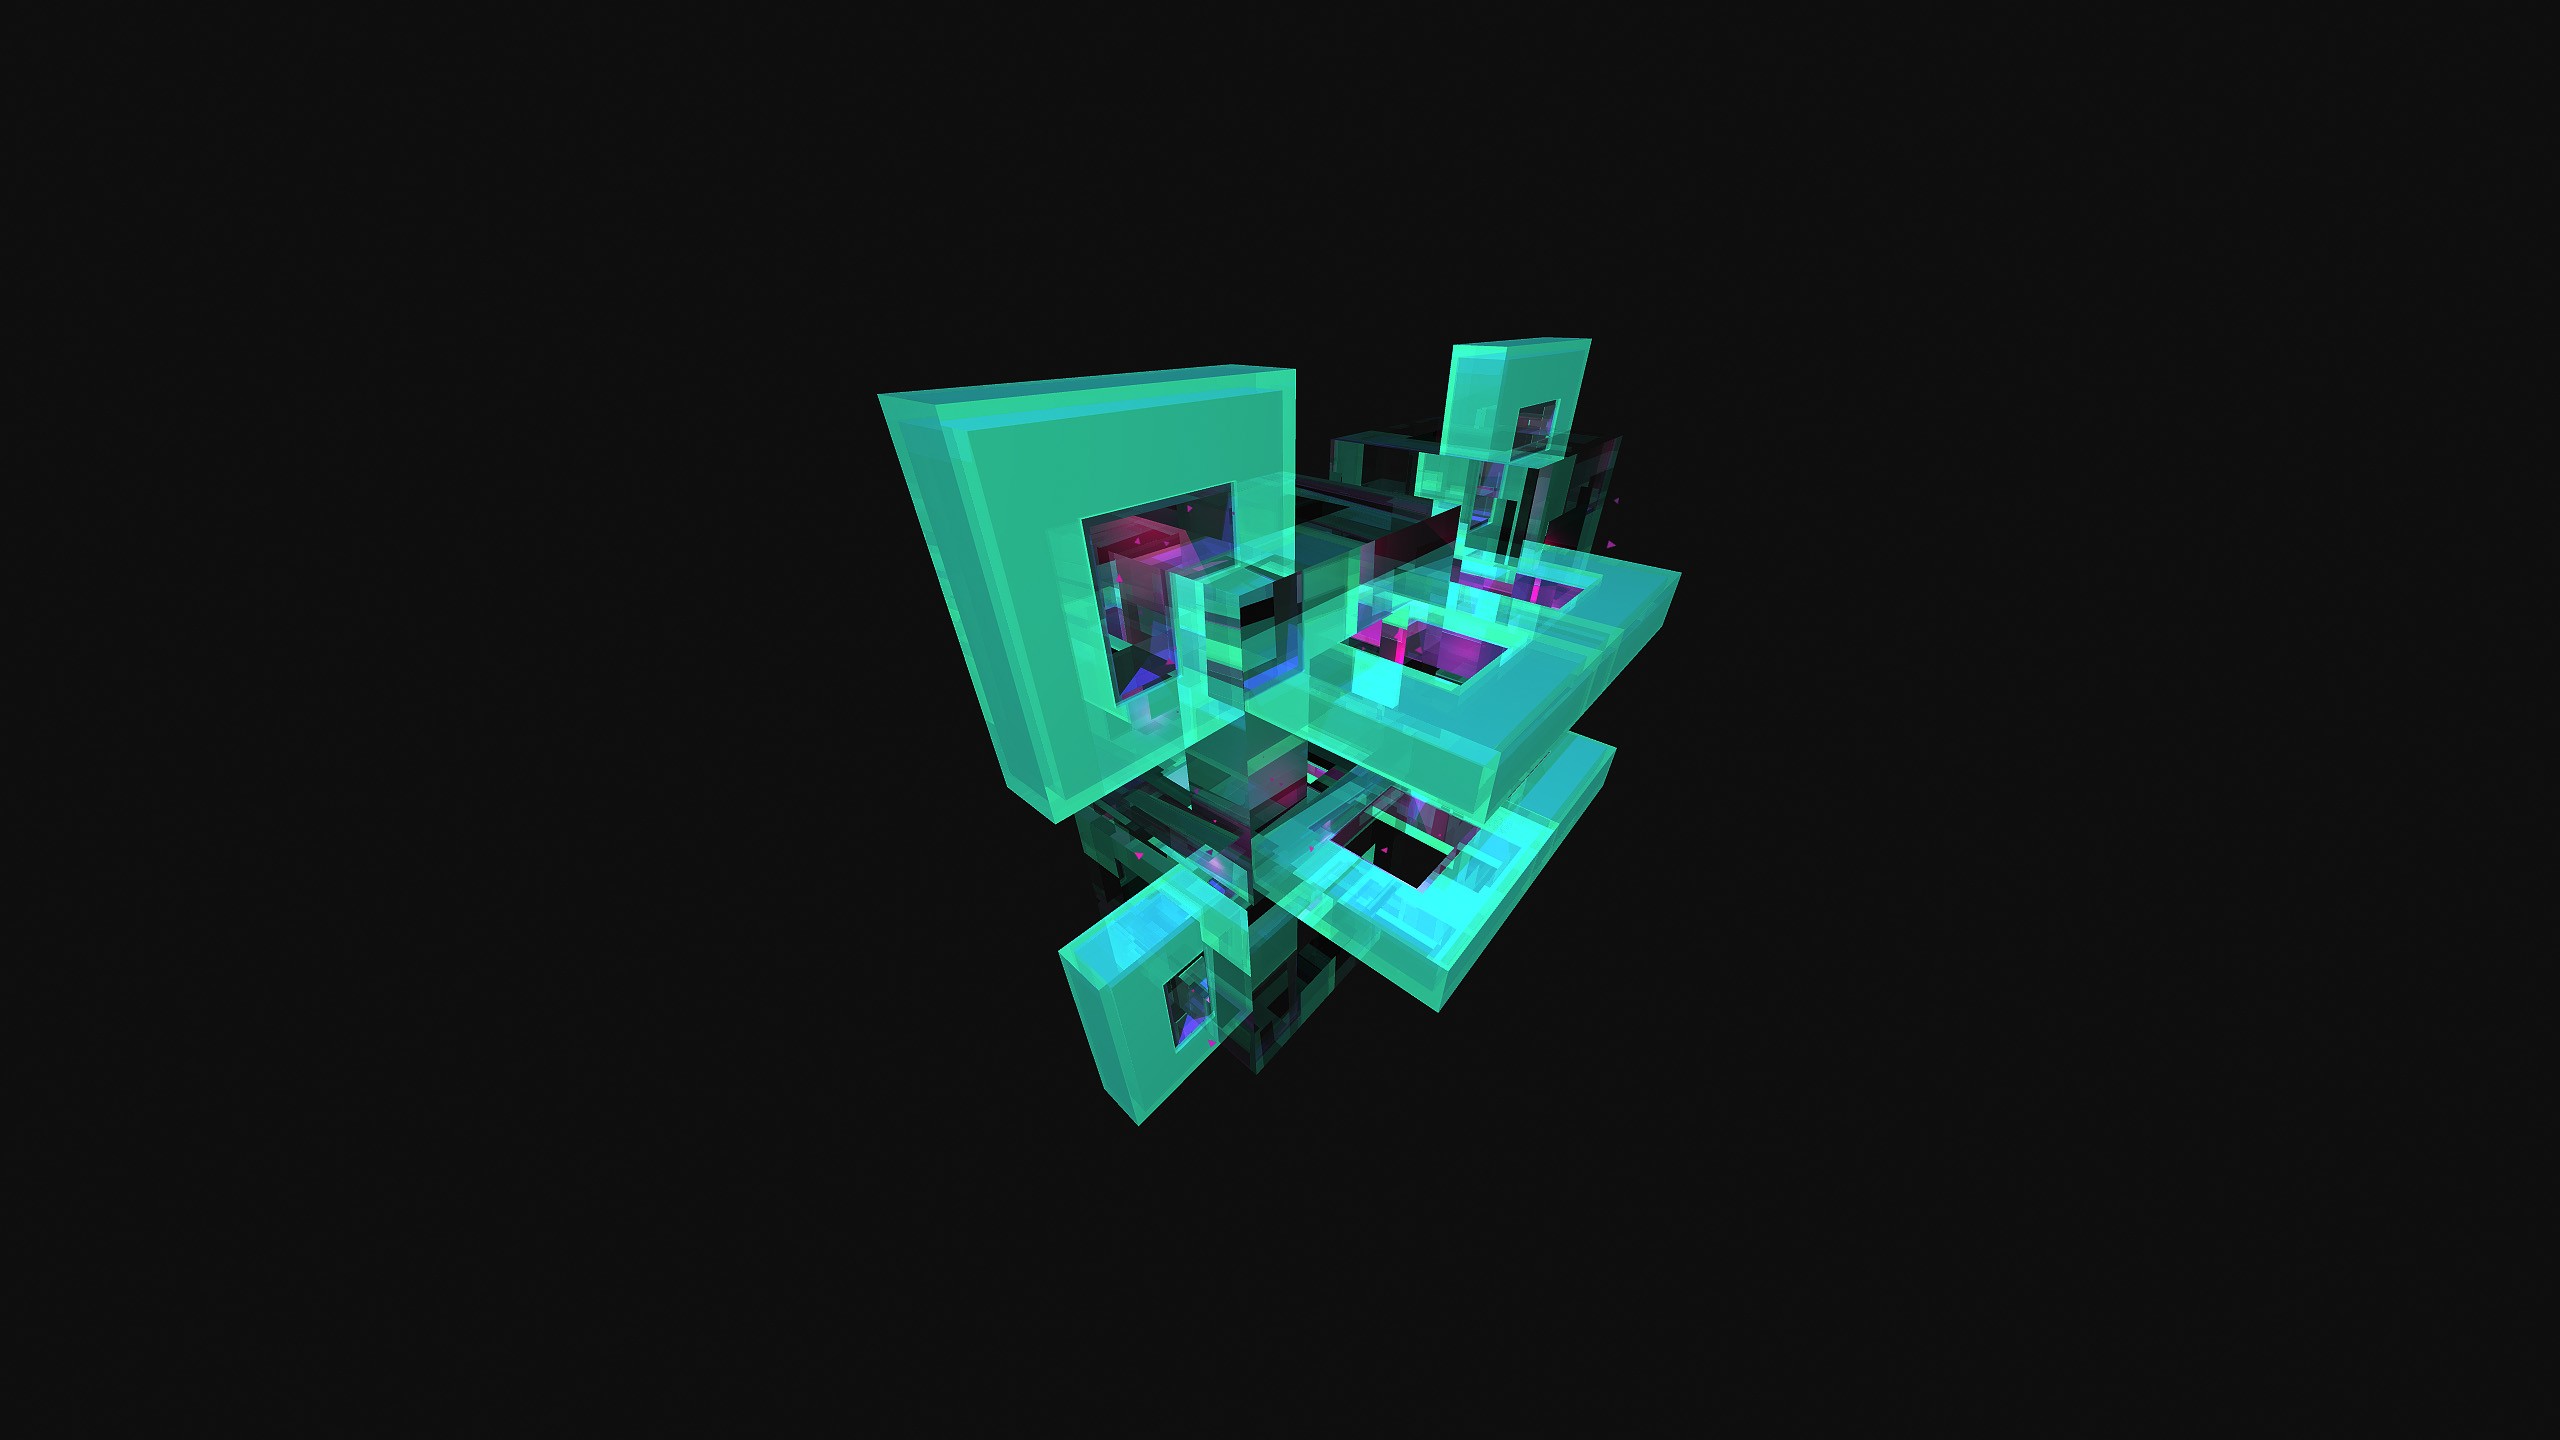 General 2560x1440 digital art turquoise simple background black 3D Blocks black background abstract